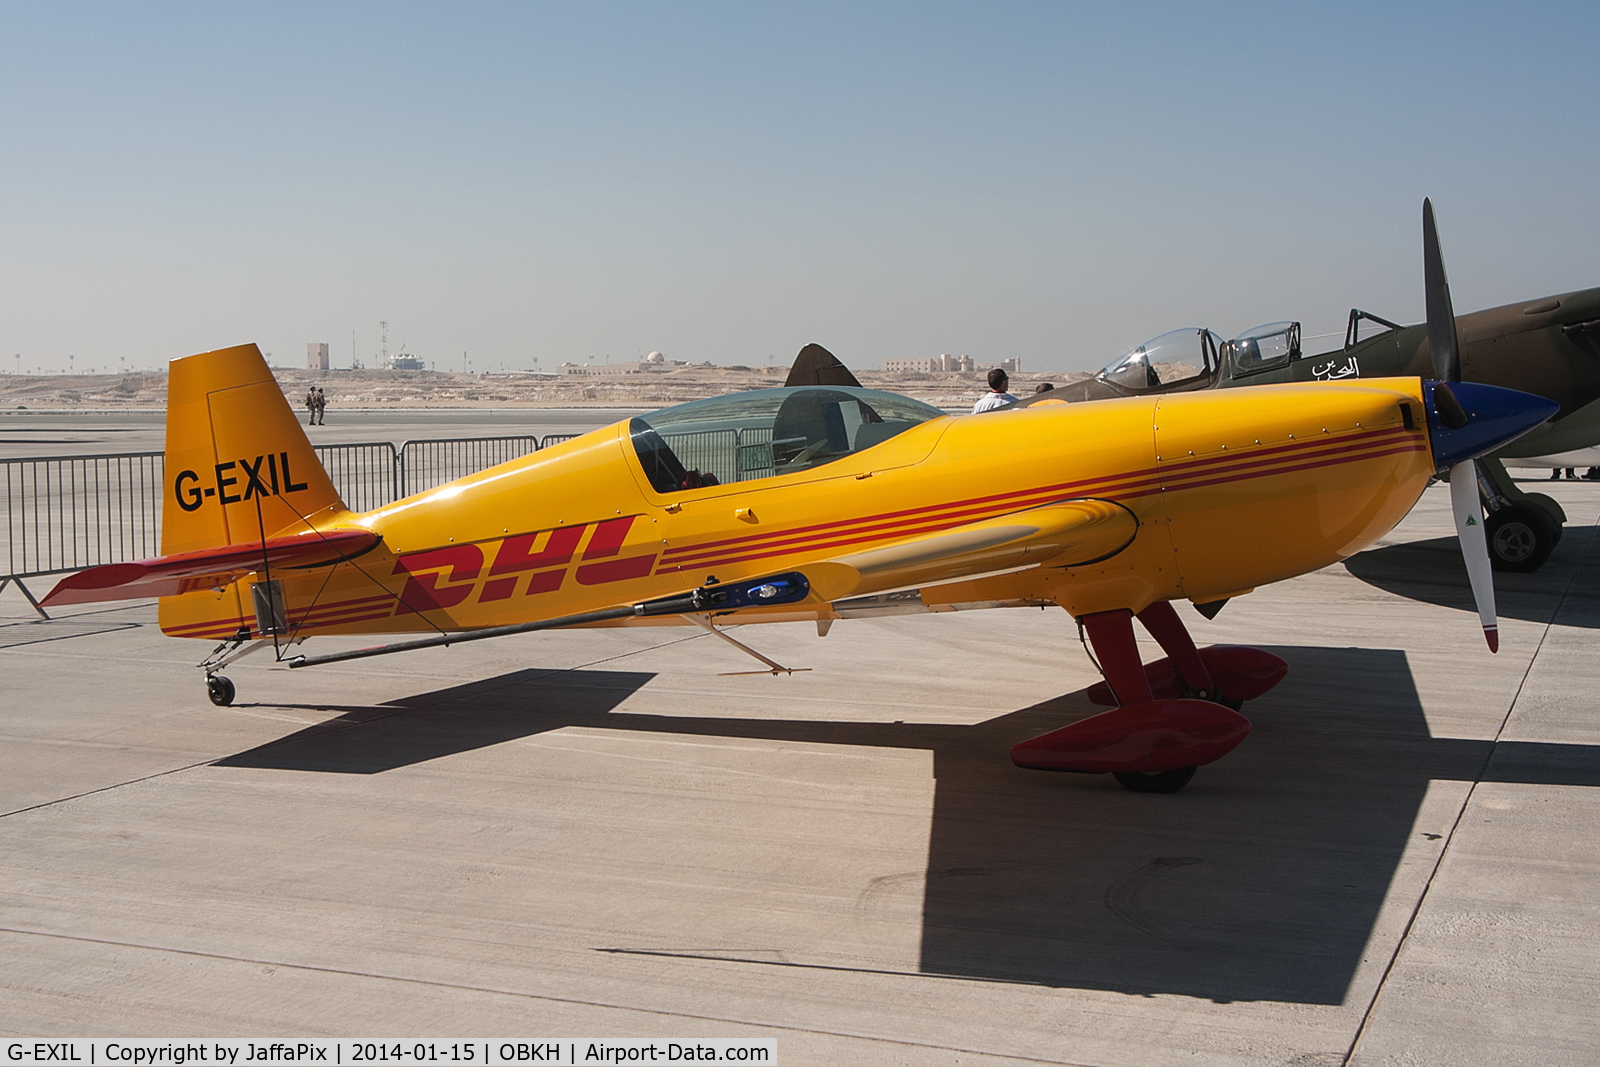 G-EXIL, 2010 Extra EA-300S C/N 1036, Now in DHL colours for the 2014 season